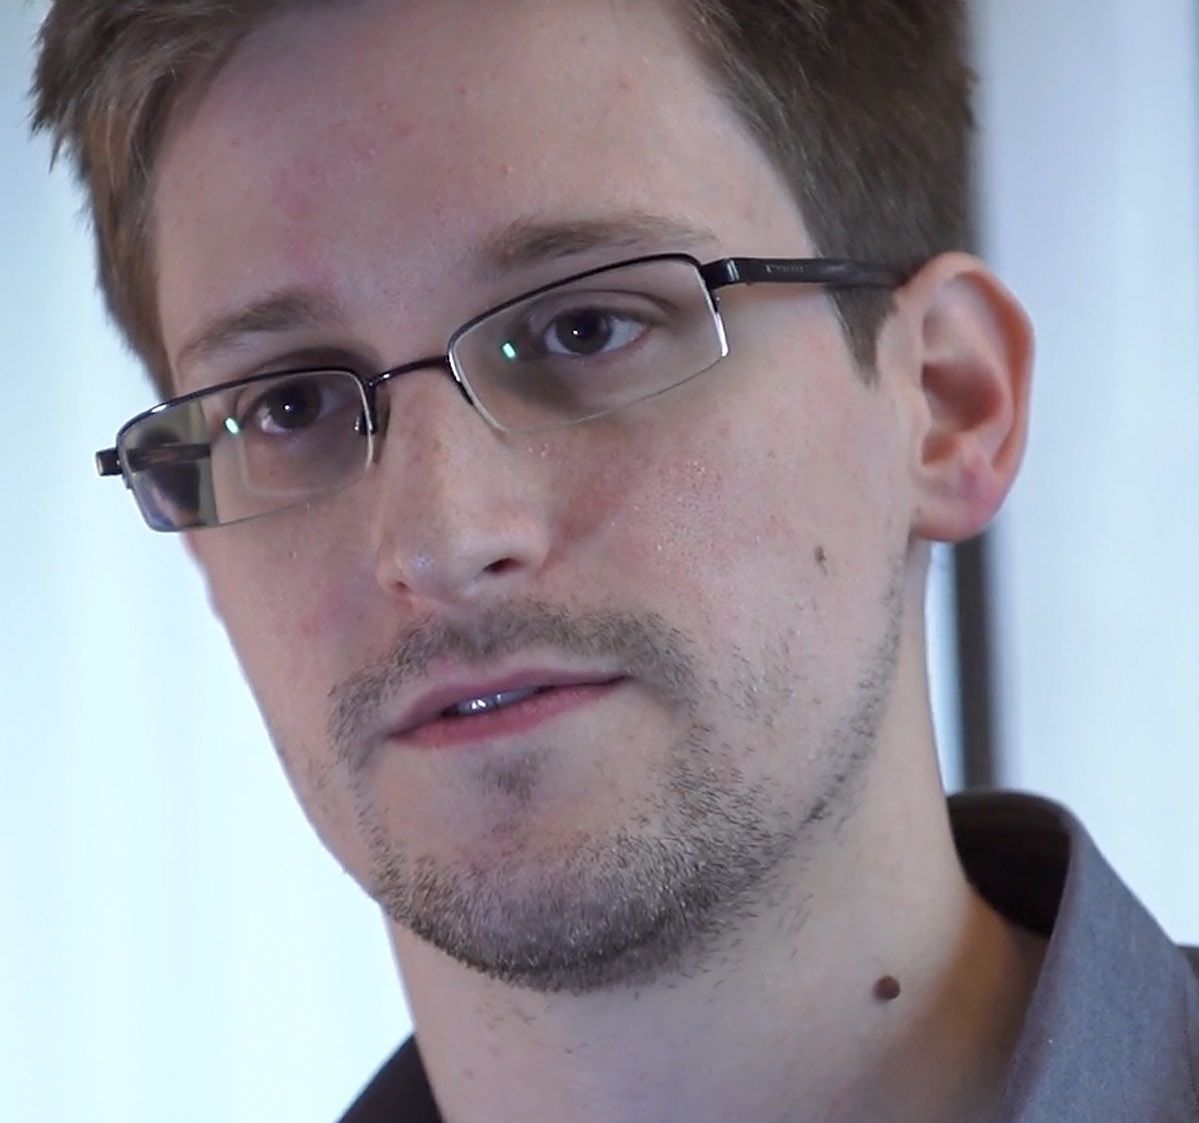 Edward Snowden Photo The Guardian via Getty Images_cropped